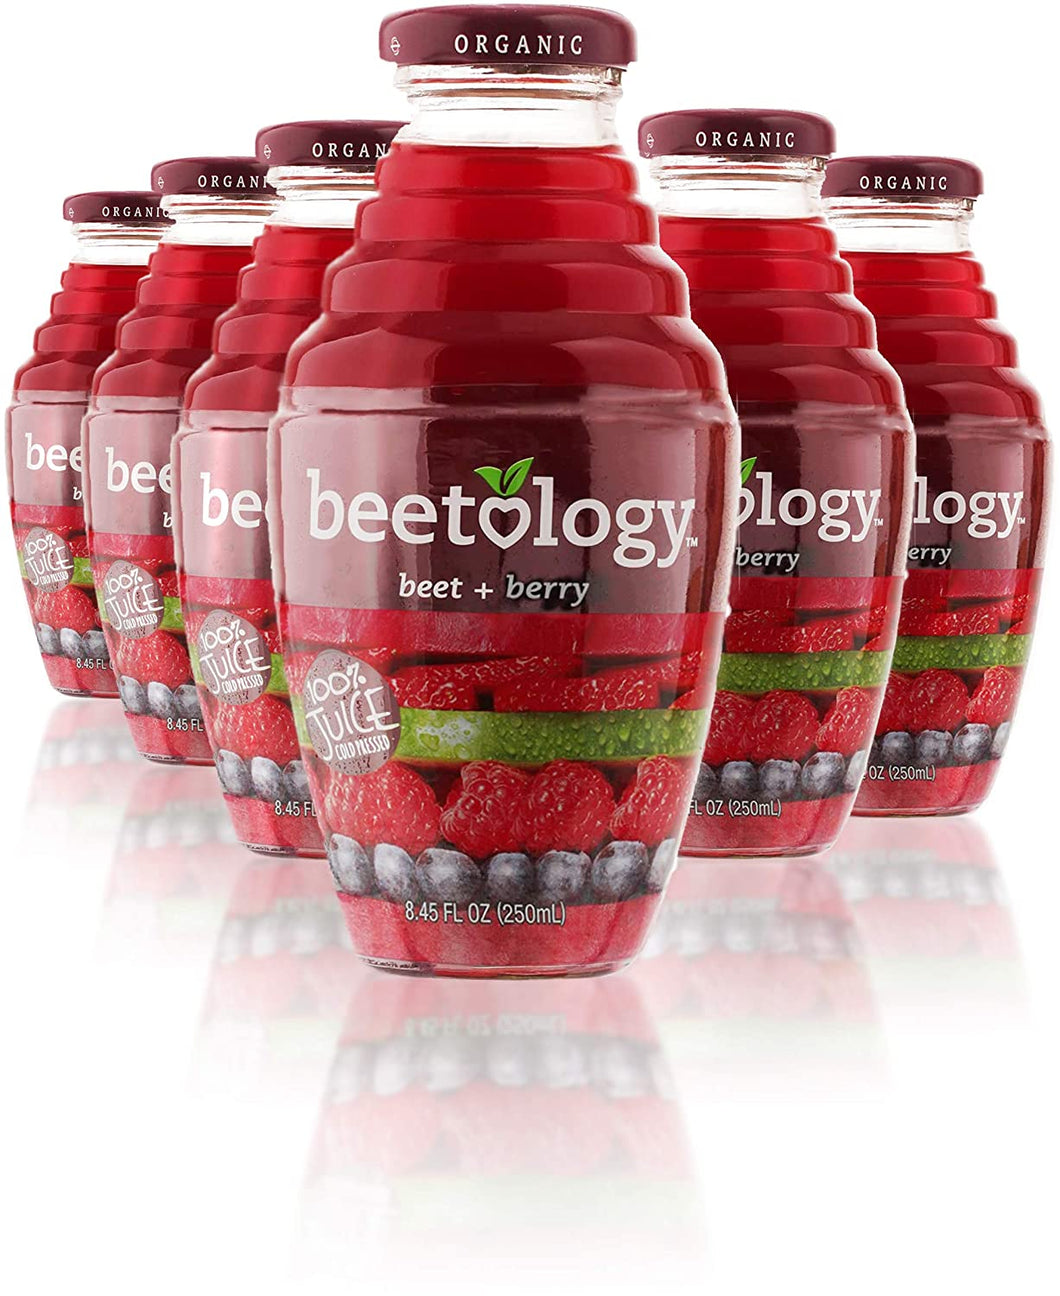 Beetology 100% Organic Cold Pressed Juice, Beet & Berry, 8.45oz (Pack of 6)